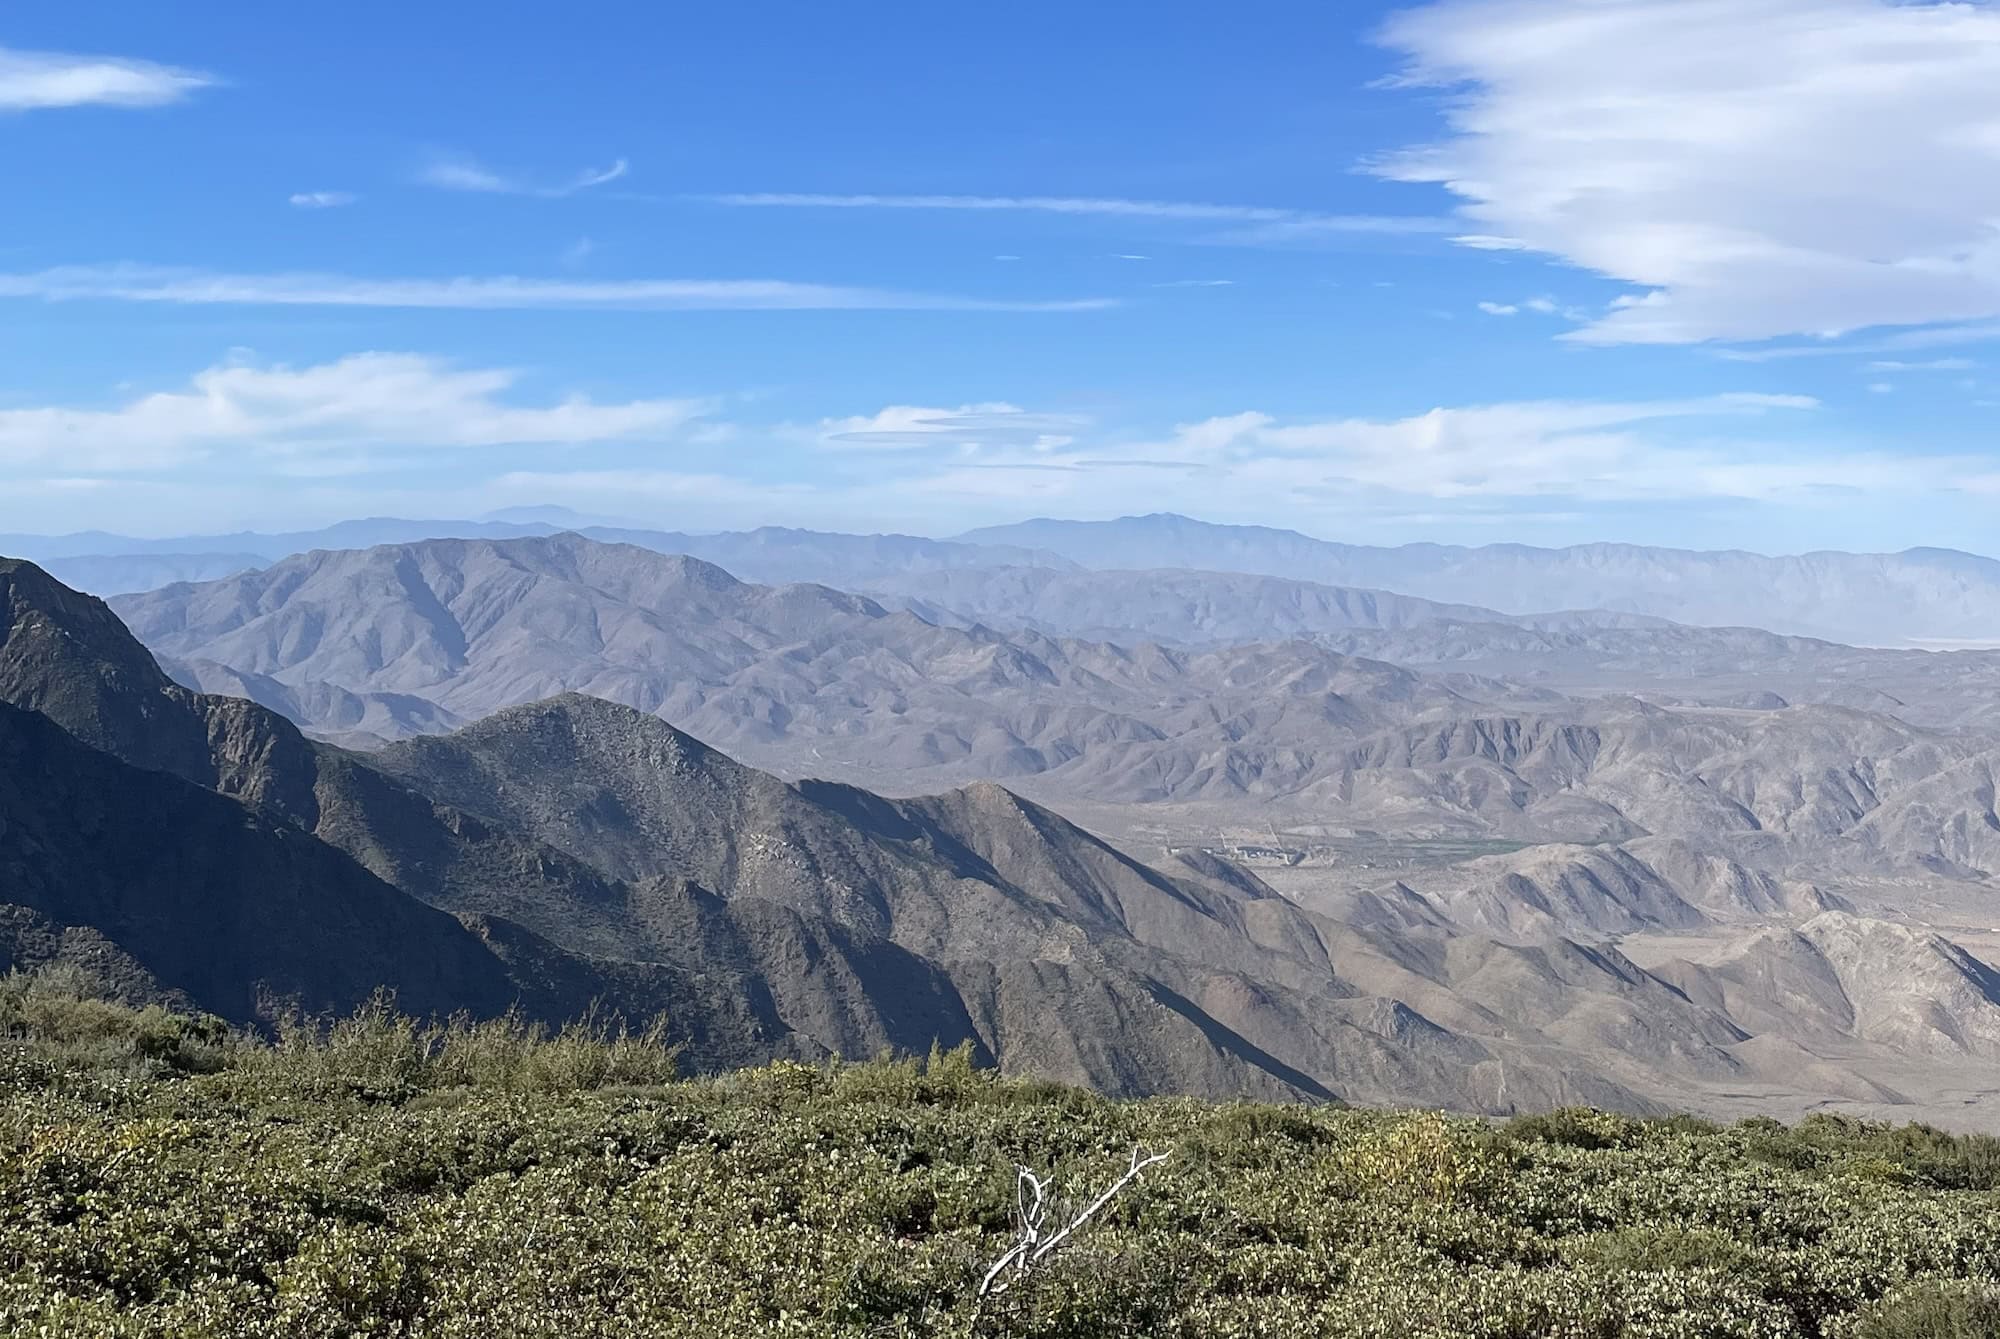 Leaving Mount Laguna and looking down to Anza Borrego